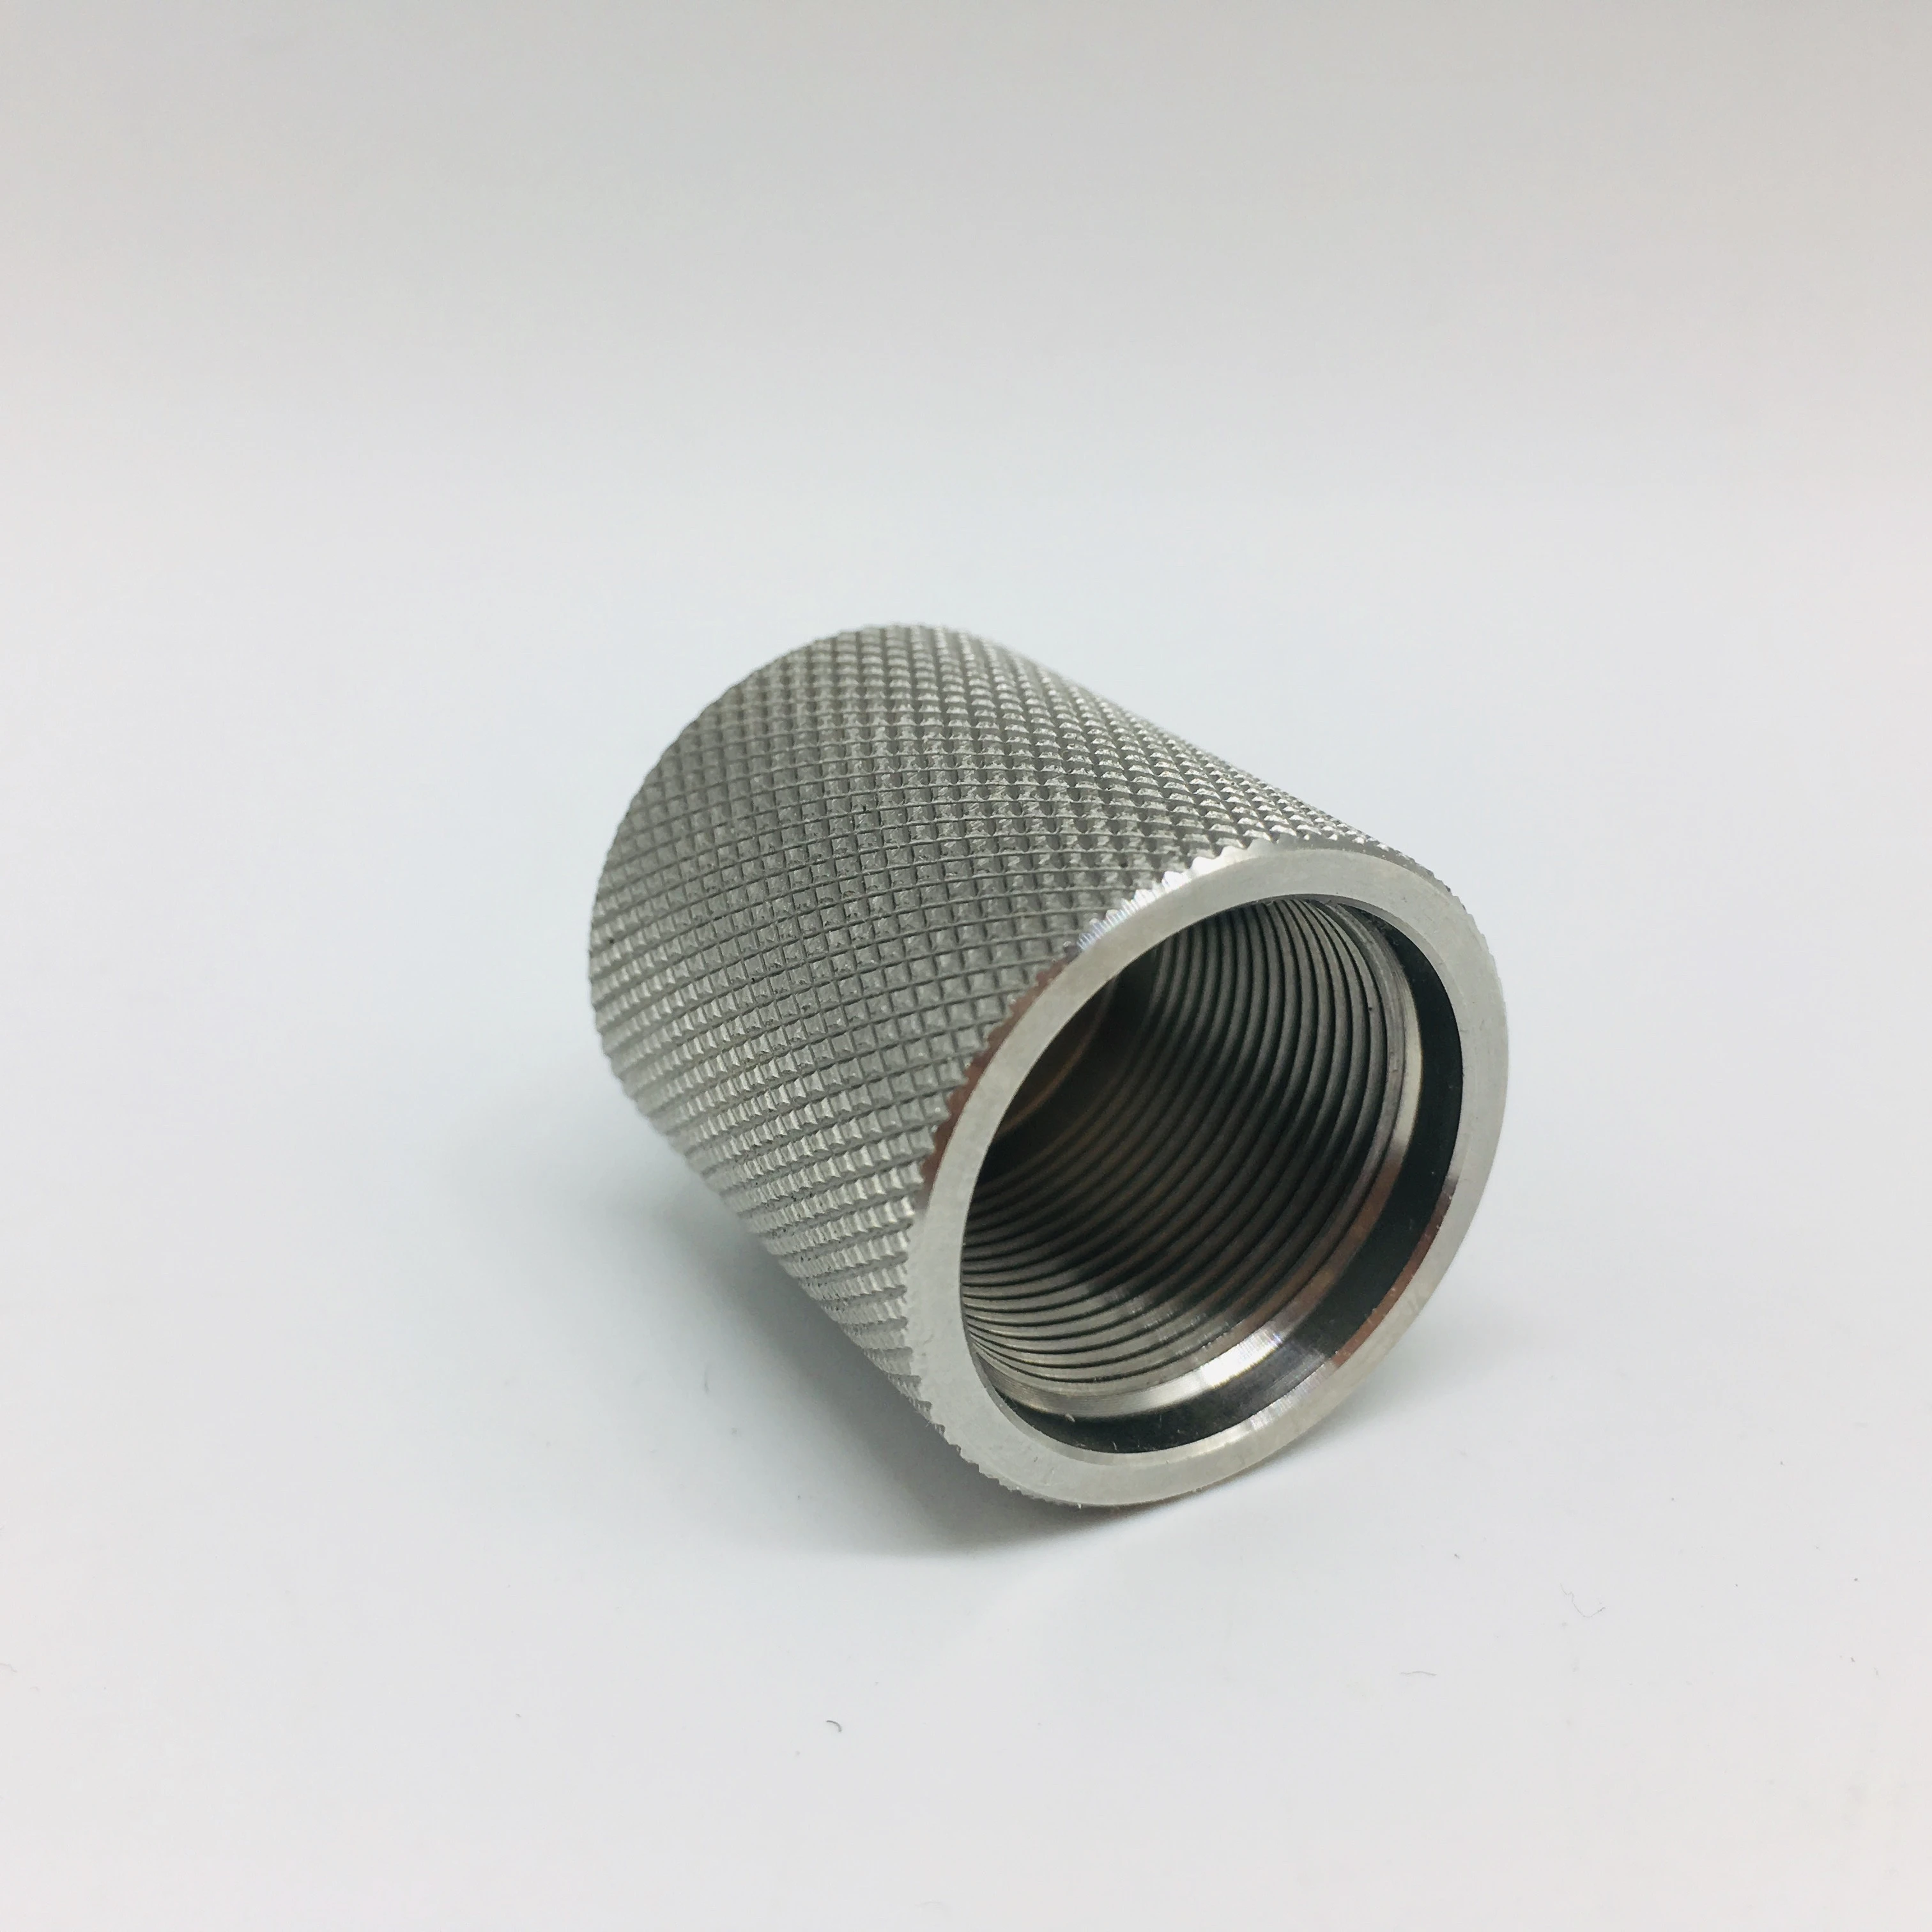 Customized processing service - factory CNC lathe turning processing parts service customized aluminum alloy knurling parts